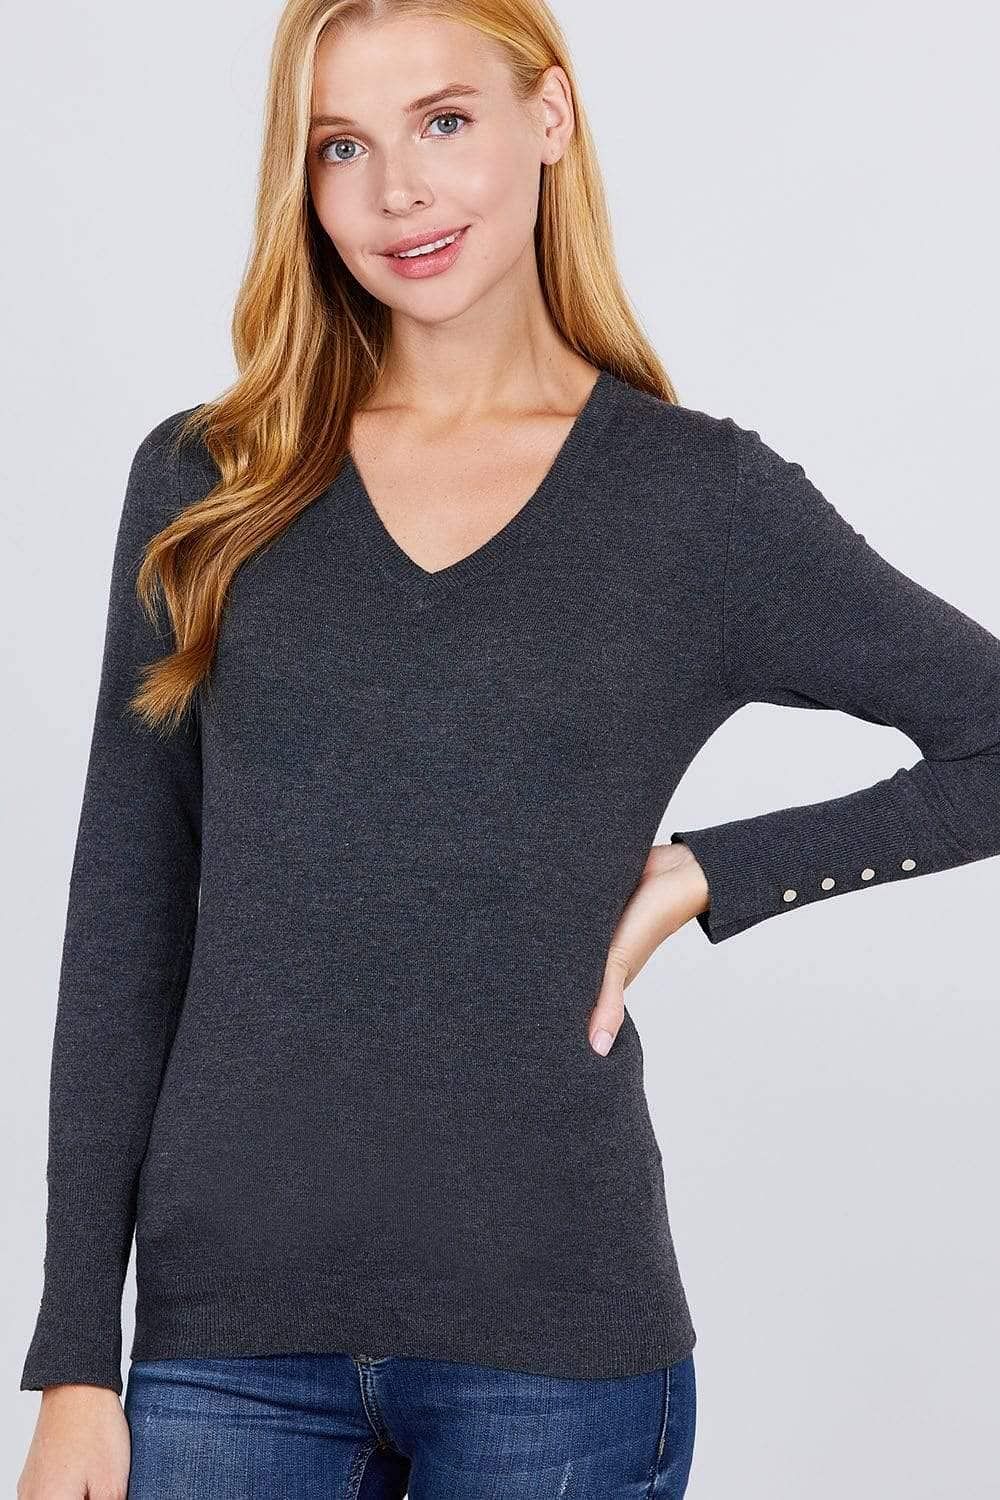 Charcoal Gray V-Neck Sweater - Shopping Therapy, LLC 